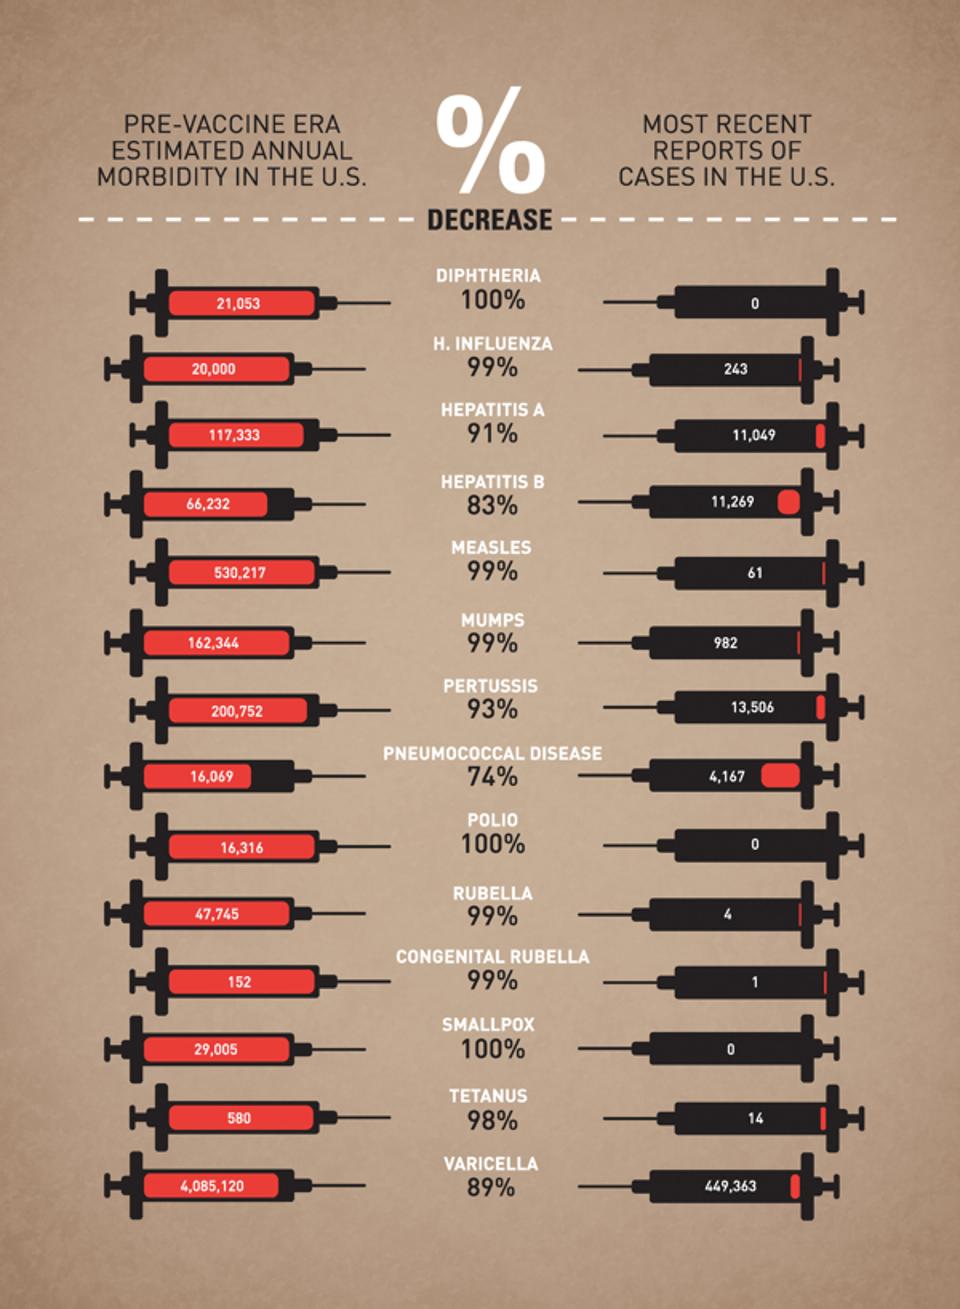 A chart showing the annual morbidity rates in the United States for various diseases prior to and after the introduction of disease vaccines.